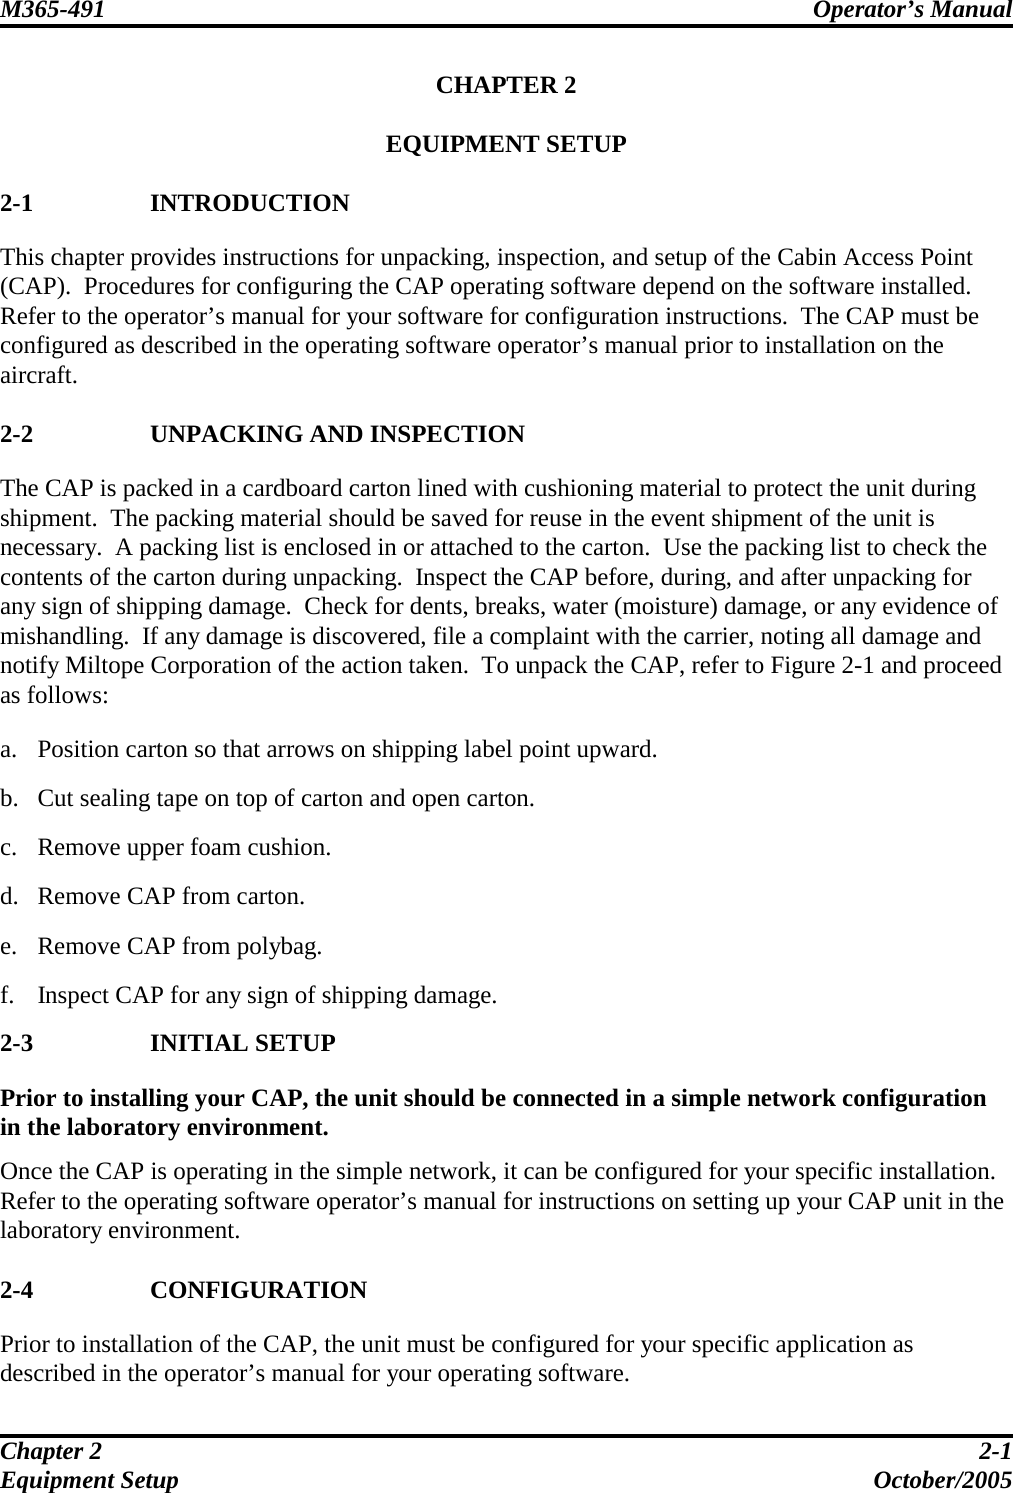 M365-491 Operator’s Manual   Chapter 2  2-1 Equipment Setup  October/2005 CHAPTER 2  EQUIPMENT SETUP  2-1 INTRODUCTION This chapter provides instructions for unpacking, inspection, and setup of the Cabin Access Point (CAP).  Procedures for configuring the CAP operating software depend on the software installed.  Refer to the operator’s manual for your software for configuration instructions.  The CAP must be configured as described in the operating software operator’s manual prior to installation on the aircraft.  2-2 UNPACKING AND INSPECTION The CAP is packed in a cardboard carton lined with cushioning material to protect the unit during shipment.  The packing material should be saved for reuse in the event shipment of the unit is necessary.  A packing list is enclosed in or attached to the carton.  Use the packing list to check the contents of the carton during unpacking.  Inspect the CAP before, during, and after unpacking for any sign of shipping damage.  Check for dents, breaks, water (moisture) damage, or any evidence of mishandling.  If any damage is discovered, file a complaint with the carrier, noting all damage and notify Miltope Corporation of the action taken.  To unpack the CAP, refer to Figure 2-1 and proceed as follows:  a. Position carton so that arrows on shipping label point upward.  b. Cut sealing tape on top of carton and open carton.  c. Remove upper foam cushion.  d. Remove CAP from carton.  e. Remove CAP from polybag.  f. Inspect CAP for any sign of shipping damage. 2-3 INITIAL SETUP Prior to installing your CAP, the unit should be connected in a simple network configuration in the laboratory environment.  Once the CAP is operating in the simple network, it can be configured for your specific installation.  Refer to the operating software operator’s manual for instructions on setting up your CAP unit in the laboratory environment.  2-4 CONFIGURATION Prior to installation of the CAP, the unit must be configured for your specific application as described in the operator’s manual for your operating software. 